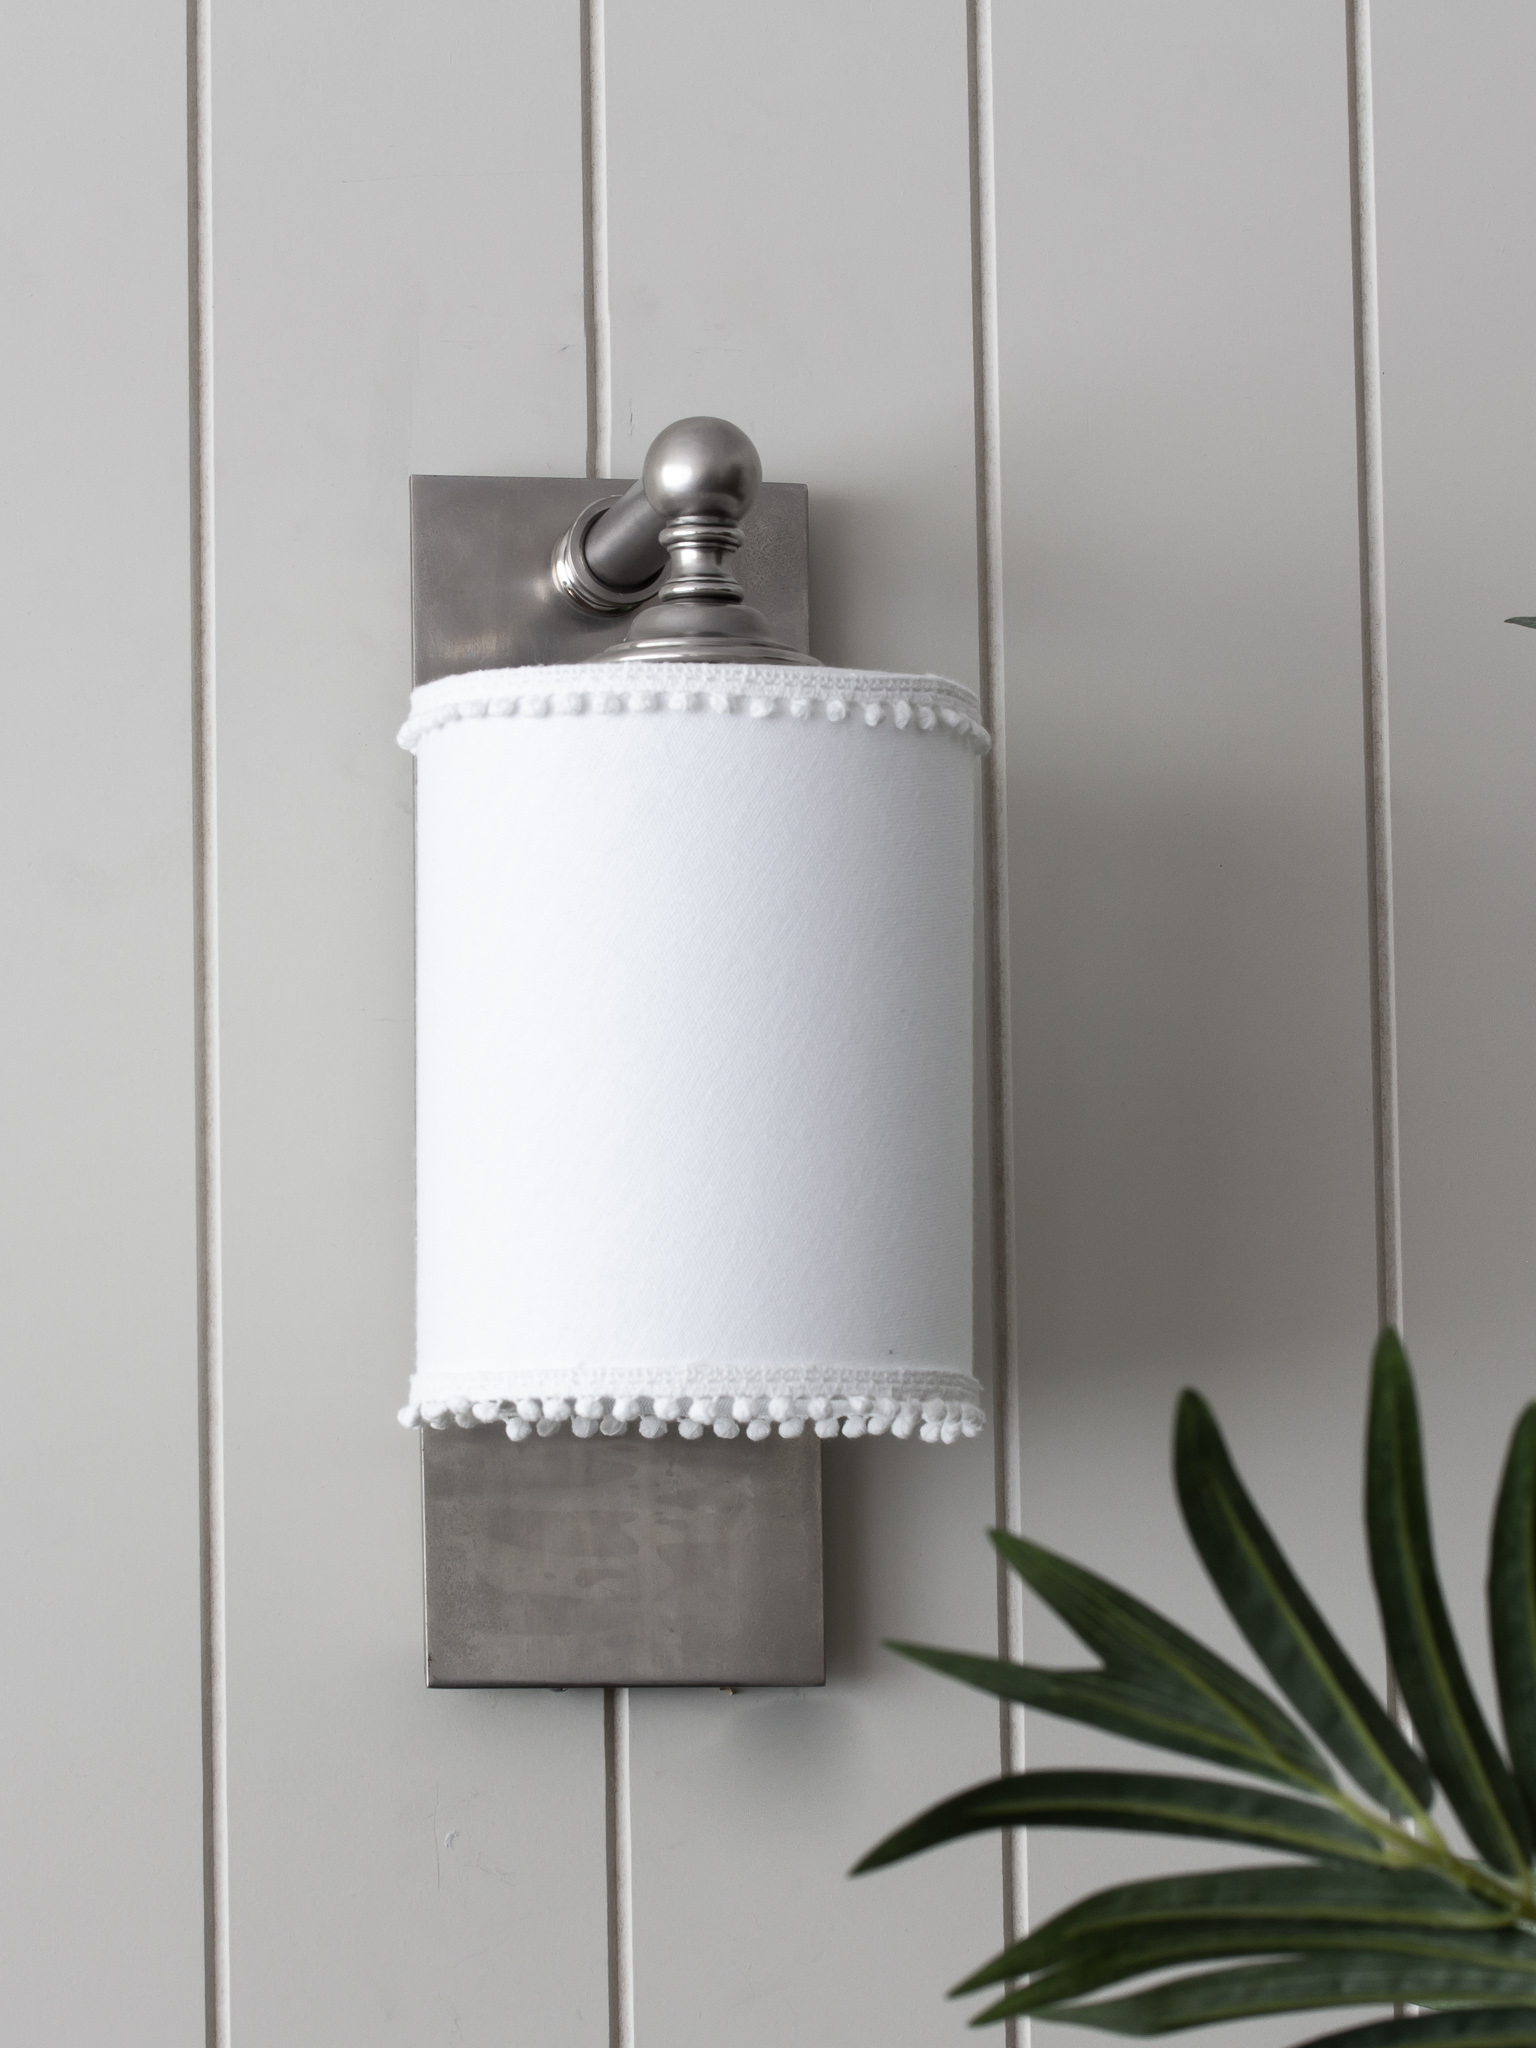 The Ripple Wall Sconce